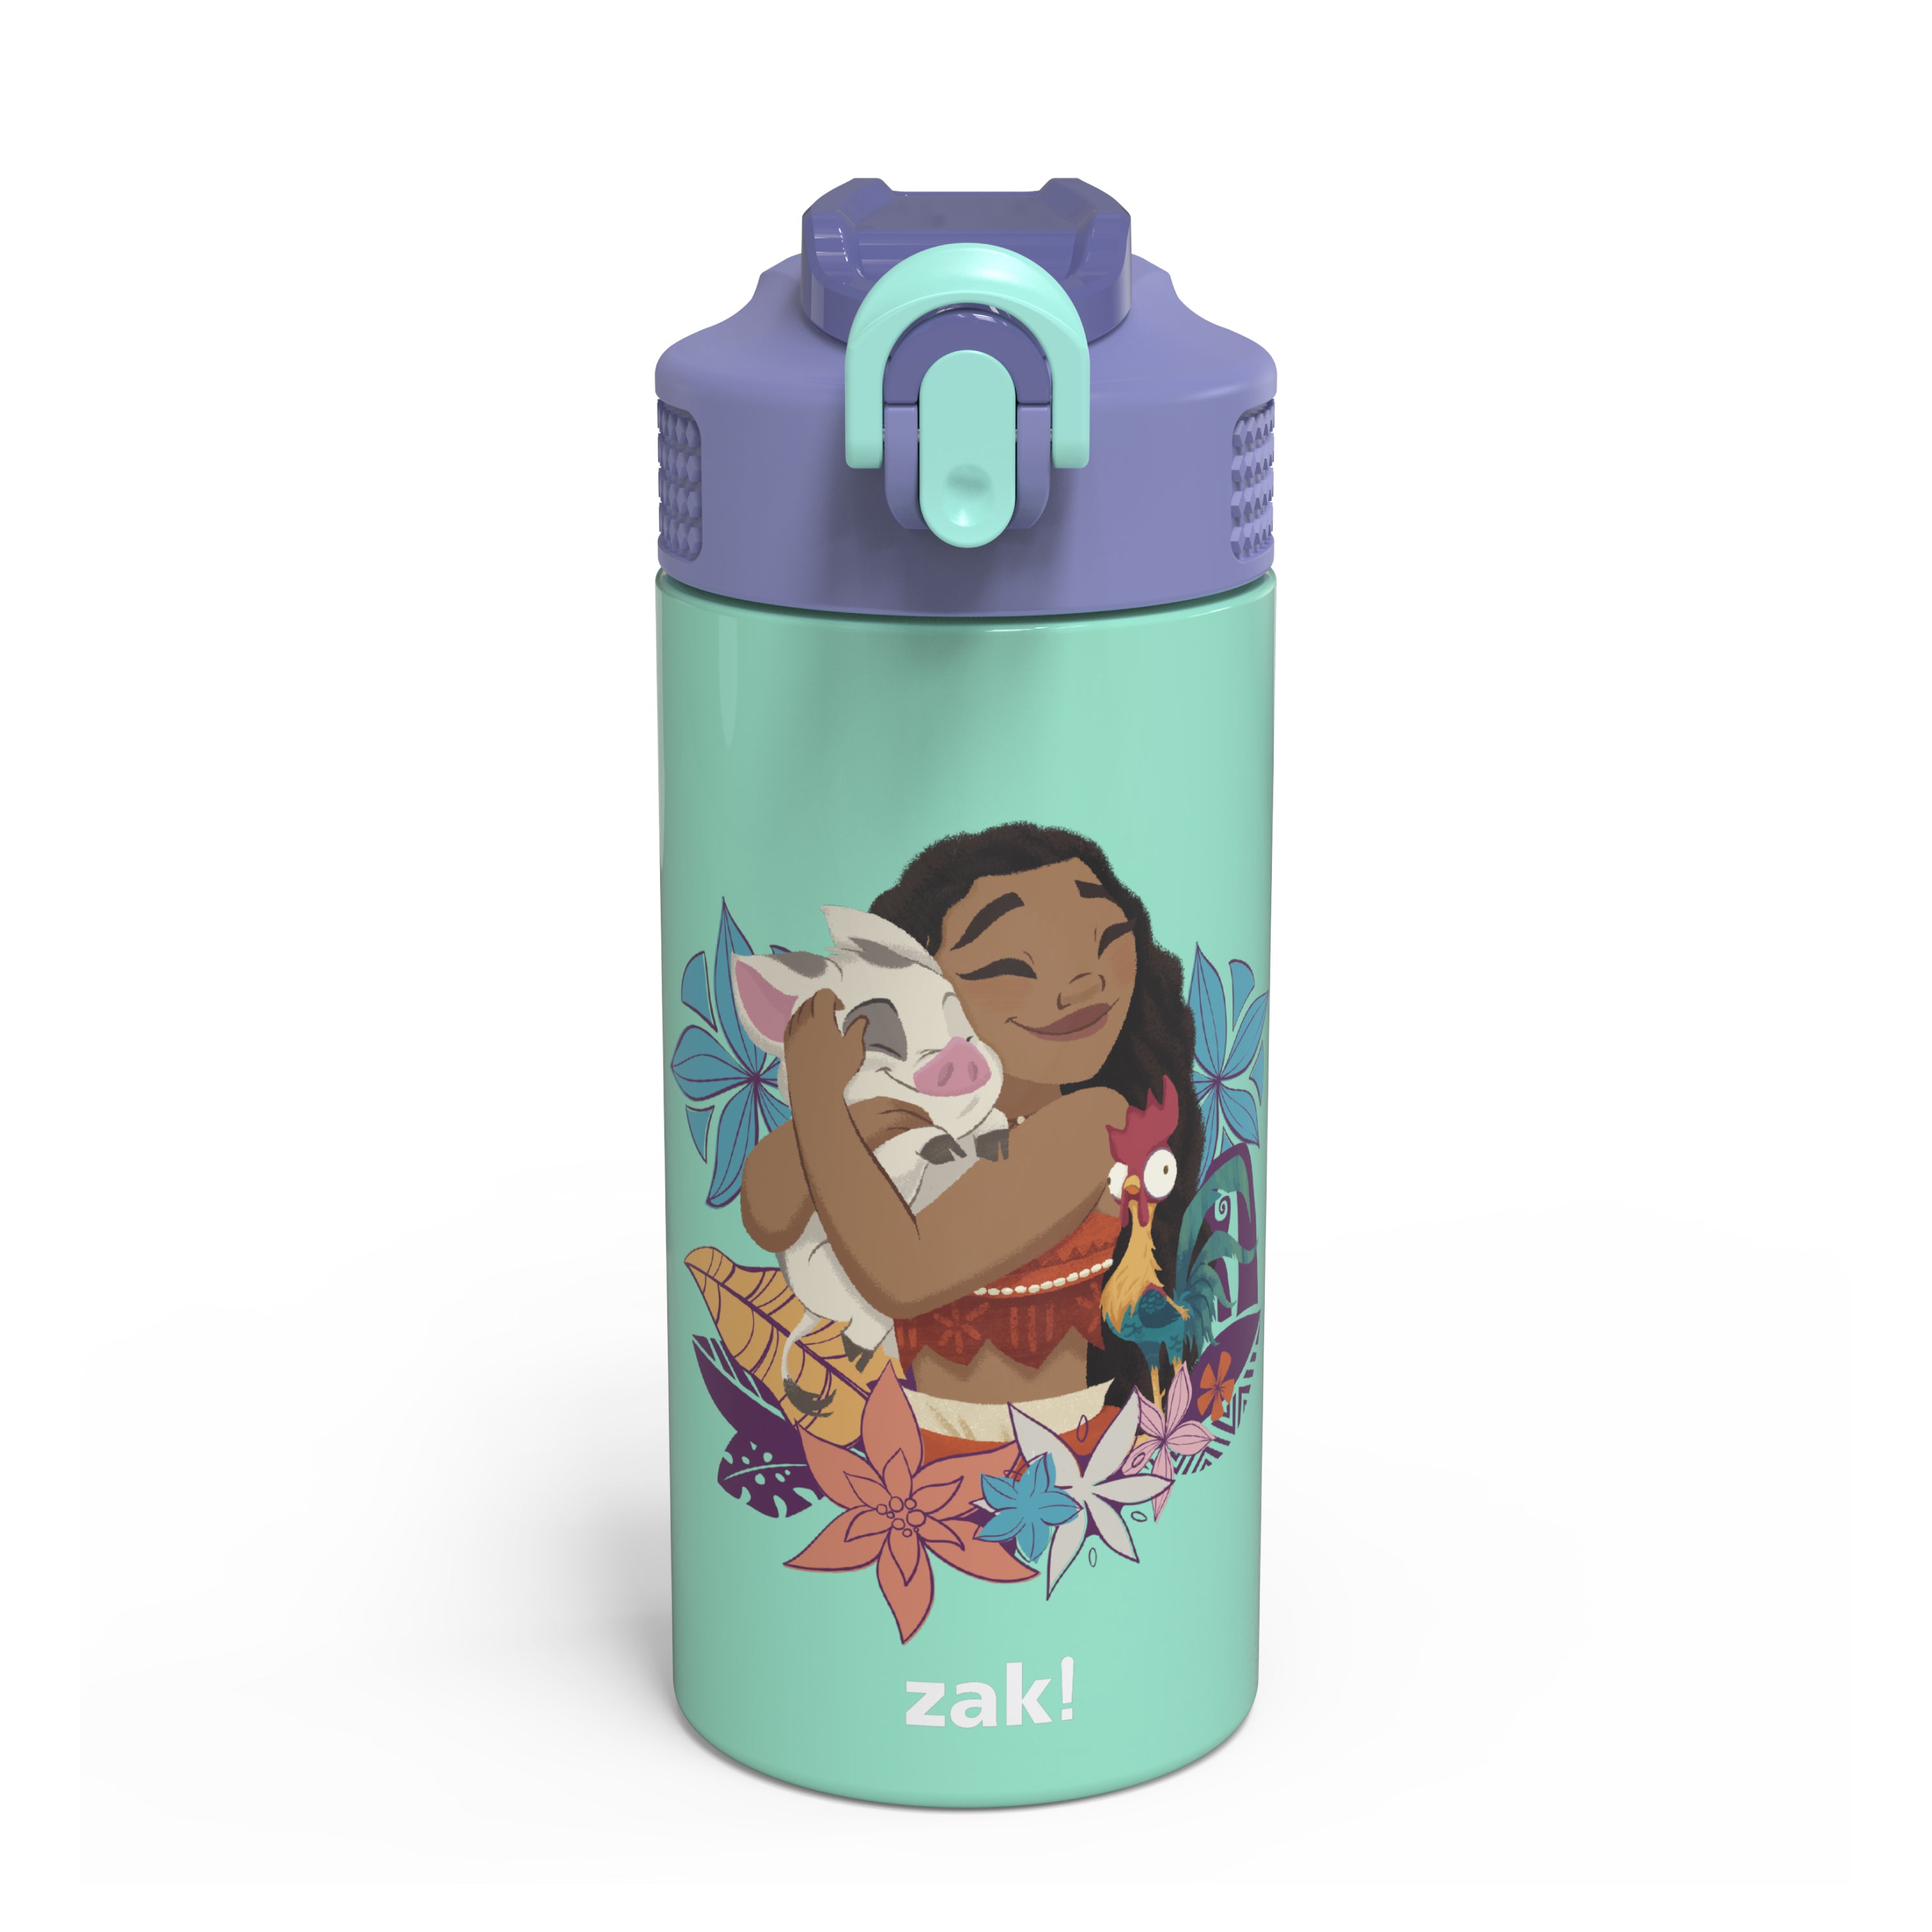 Toy story inspired water bottle #andyscoming #toystory #toystory4 #jes